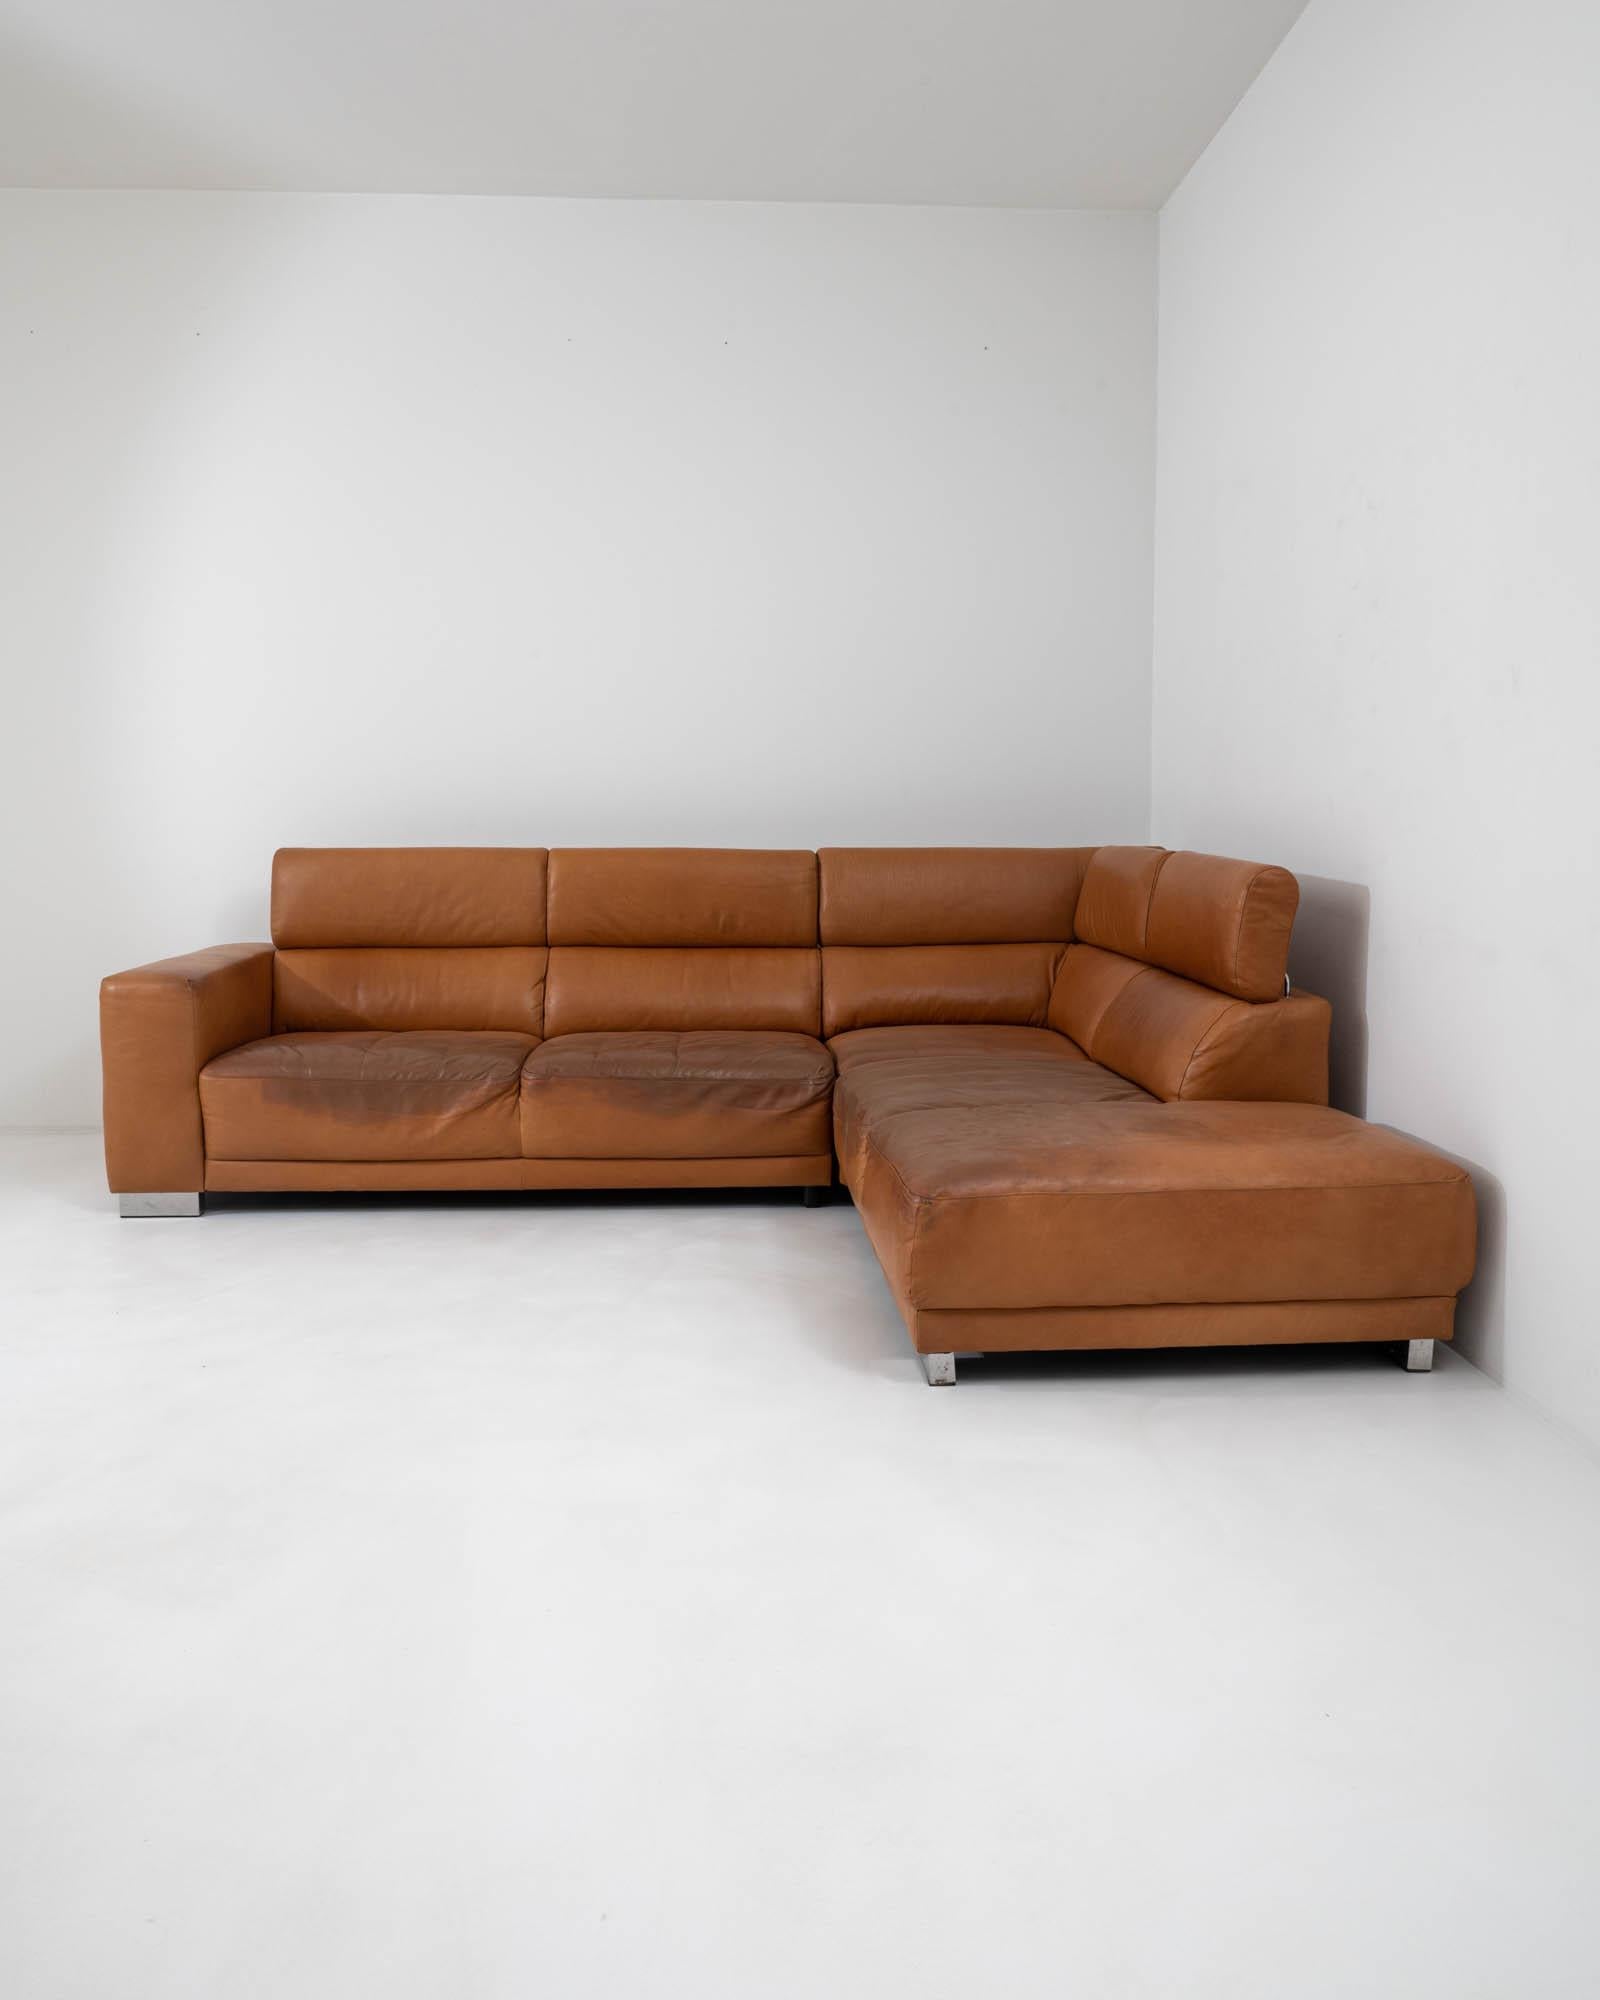 Designed in 20th century Germany, this leather corner sofa showcases a captivating Tetris-like geometry punctuated by an L-shaped seating arrangement. The practical adjustment mechanism allows the height of the backrest to fold up and down for